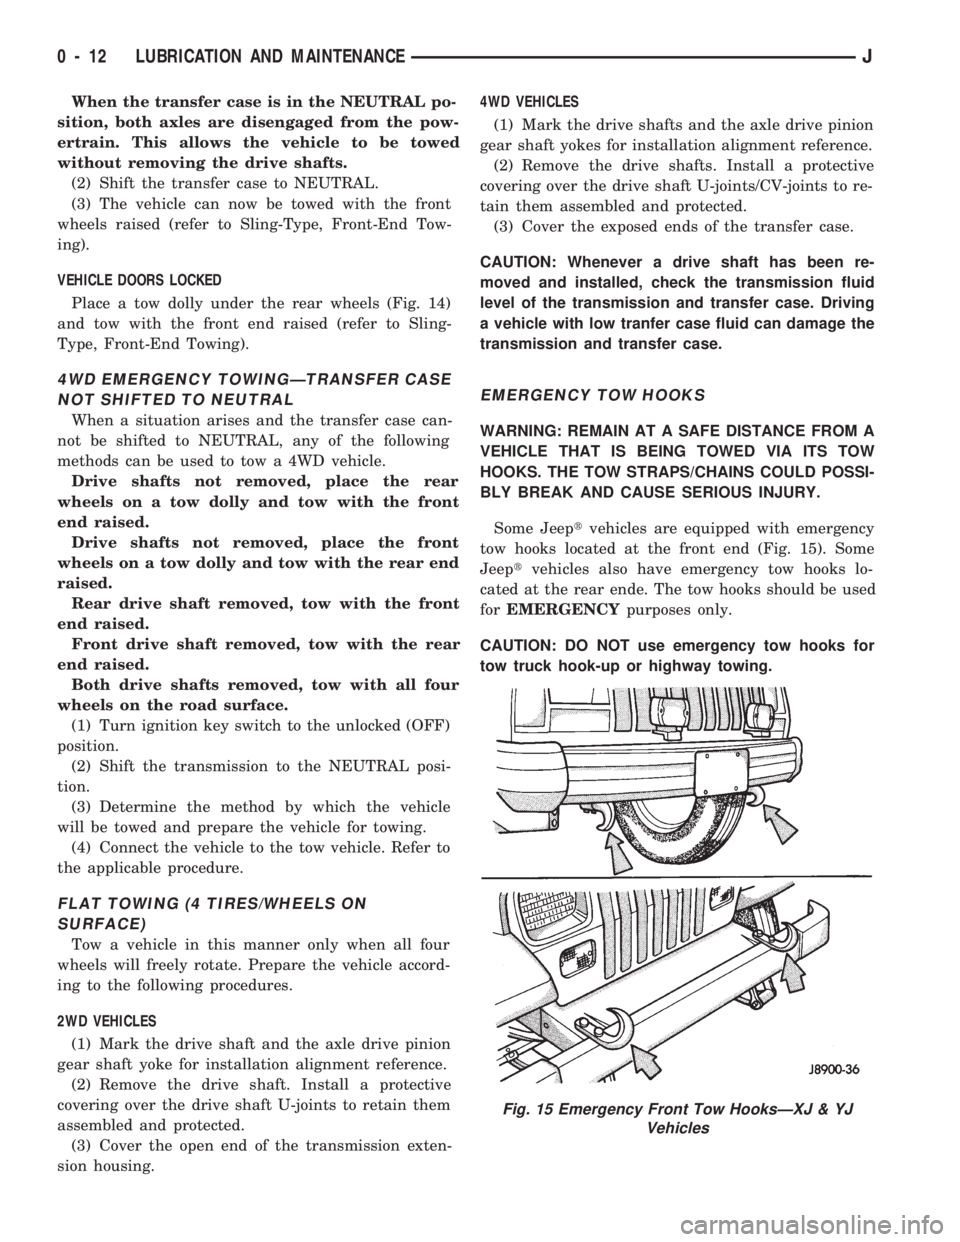 JEEP WRANGLER 1994 Owners Manual Fig. 15 Emergency Front Tow HooksÐXJ & YJ
Vehicles
0 - 12 LUBRICATION AND MAINTENANCEJ 